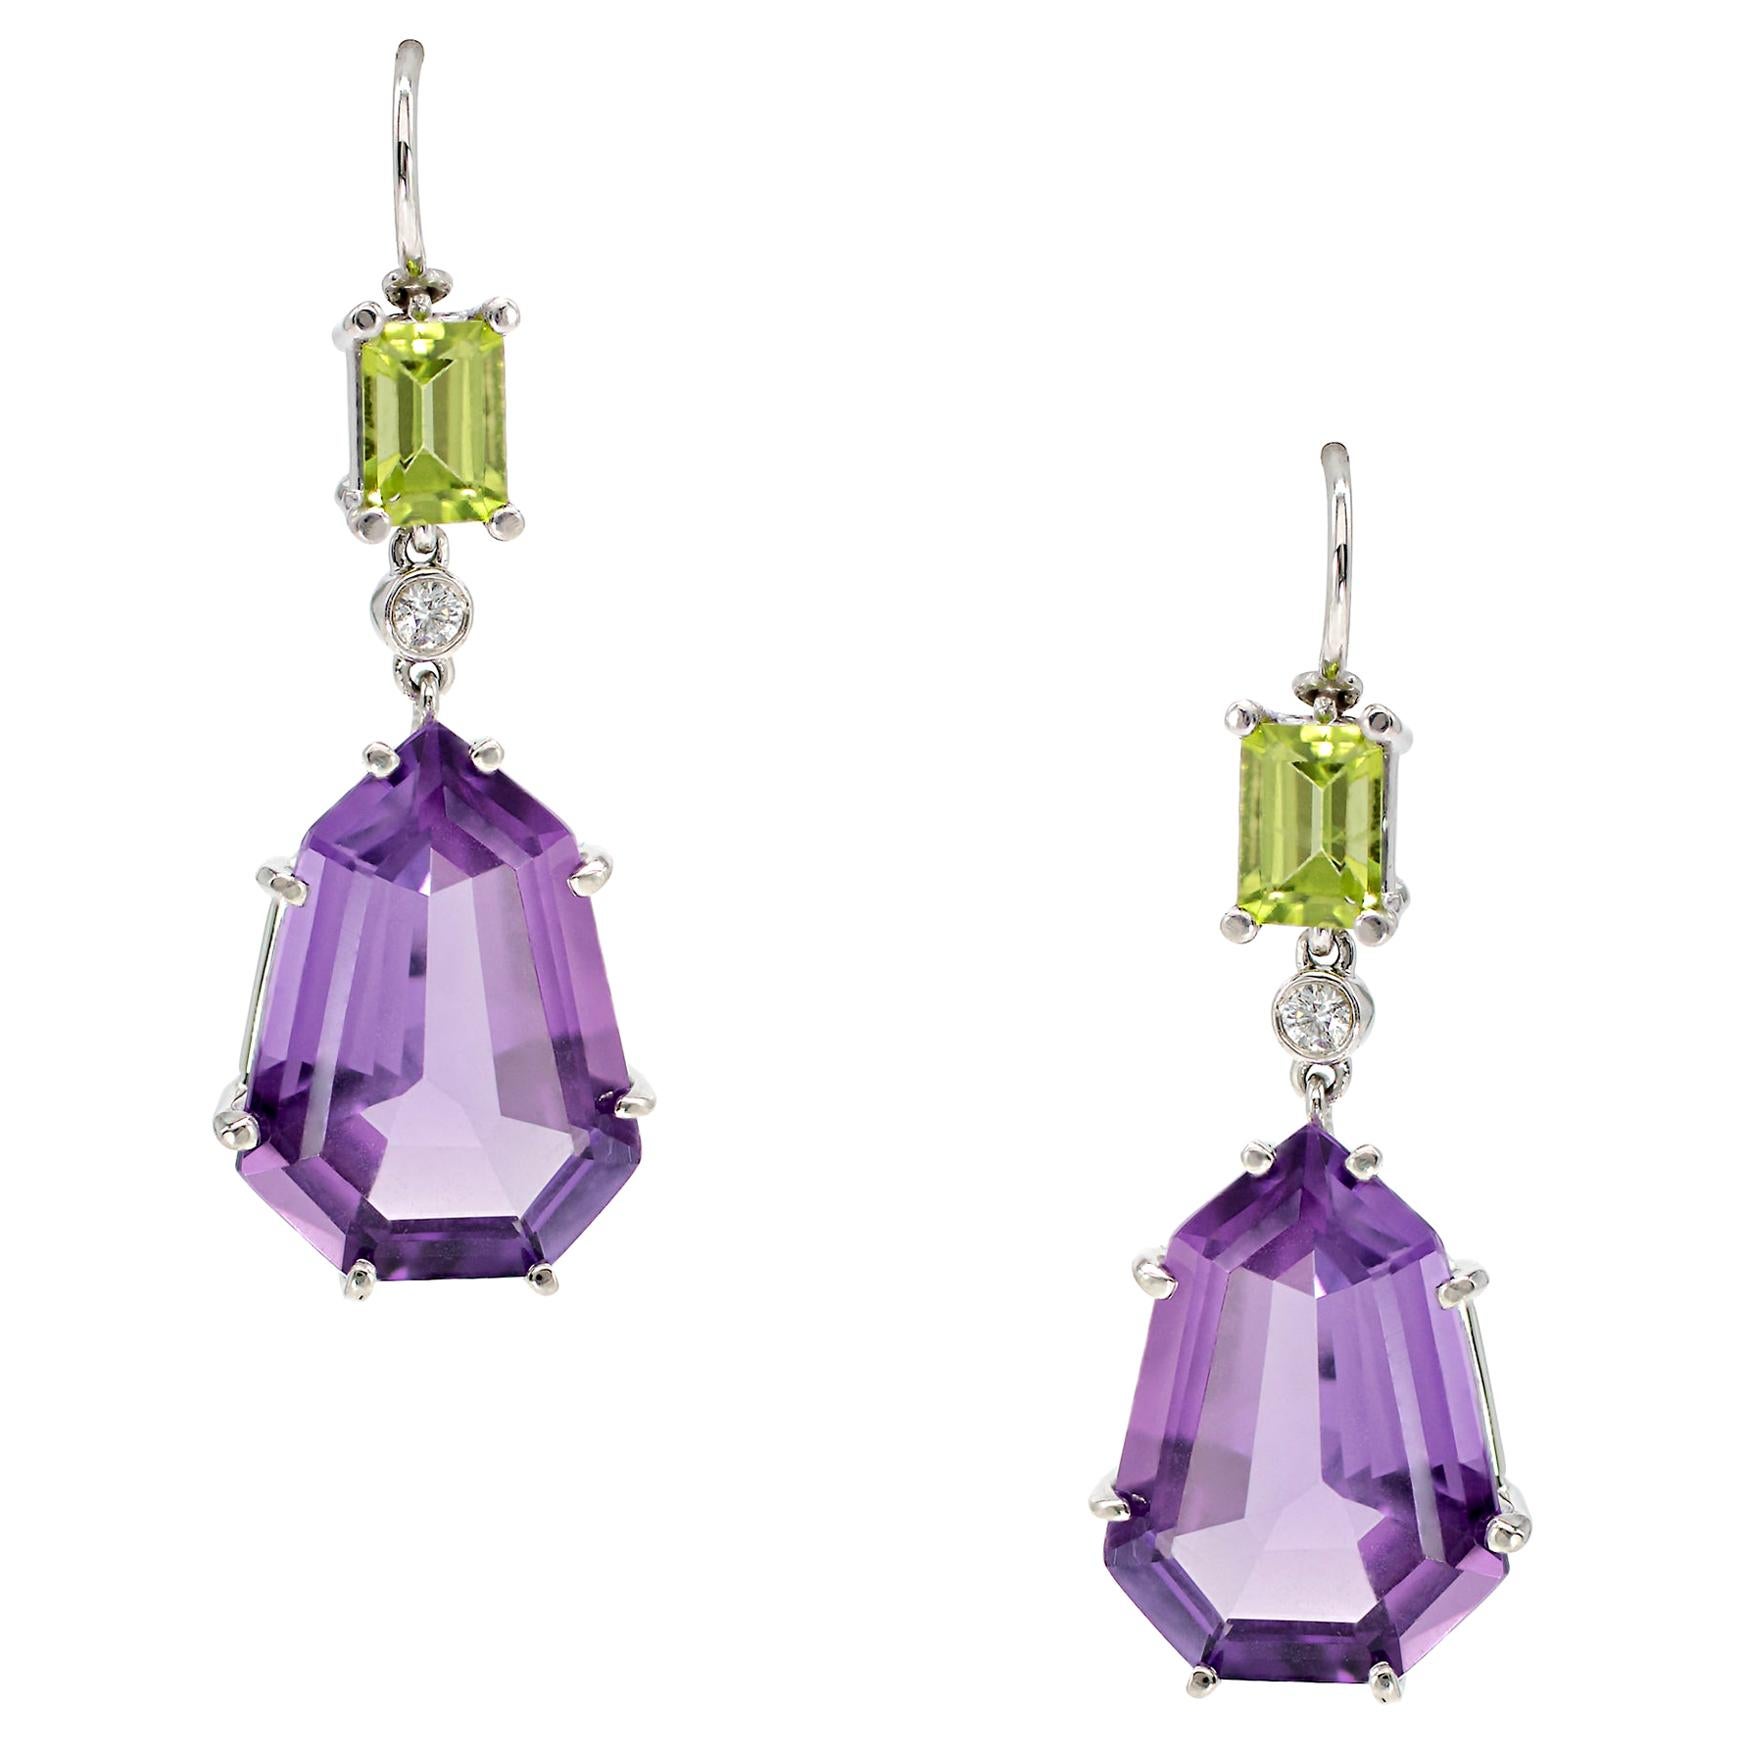 22.86 Carat Shield Shaped Amethyst, Peridot, and Diamond Earrings in Platinum For Sale